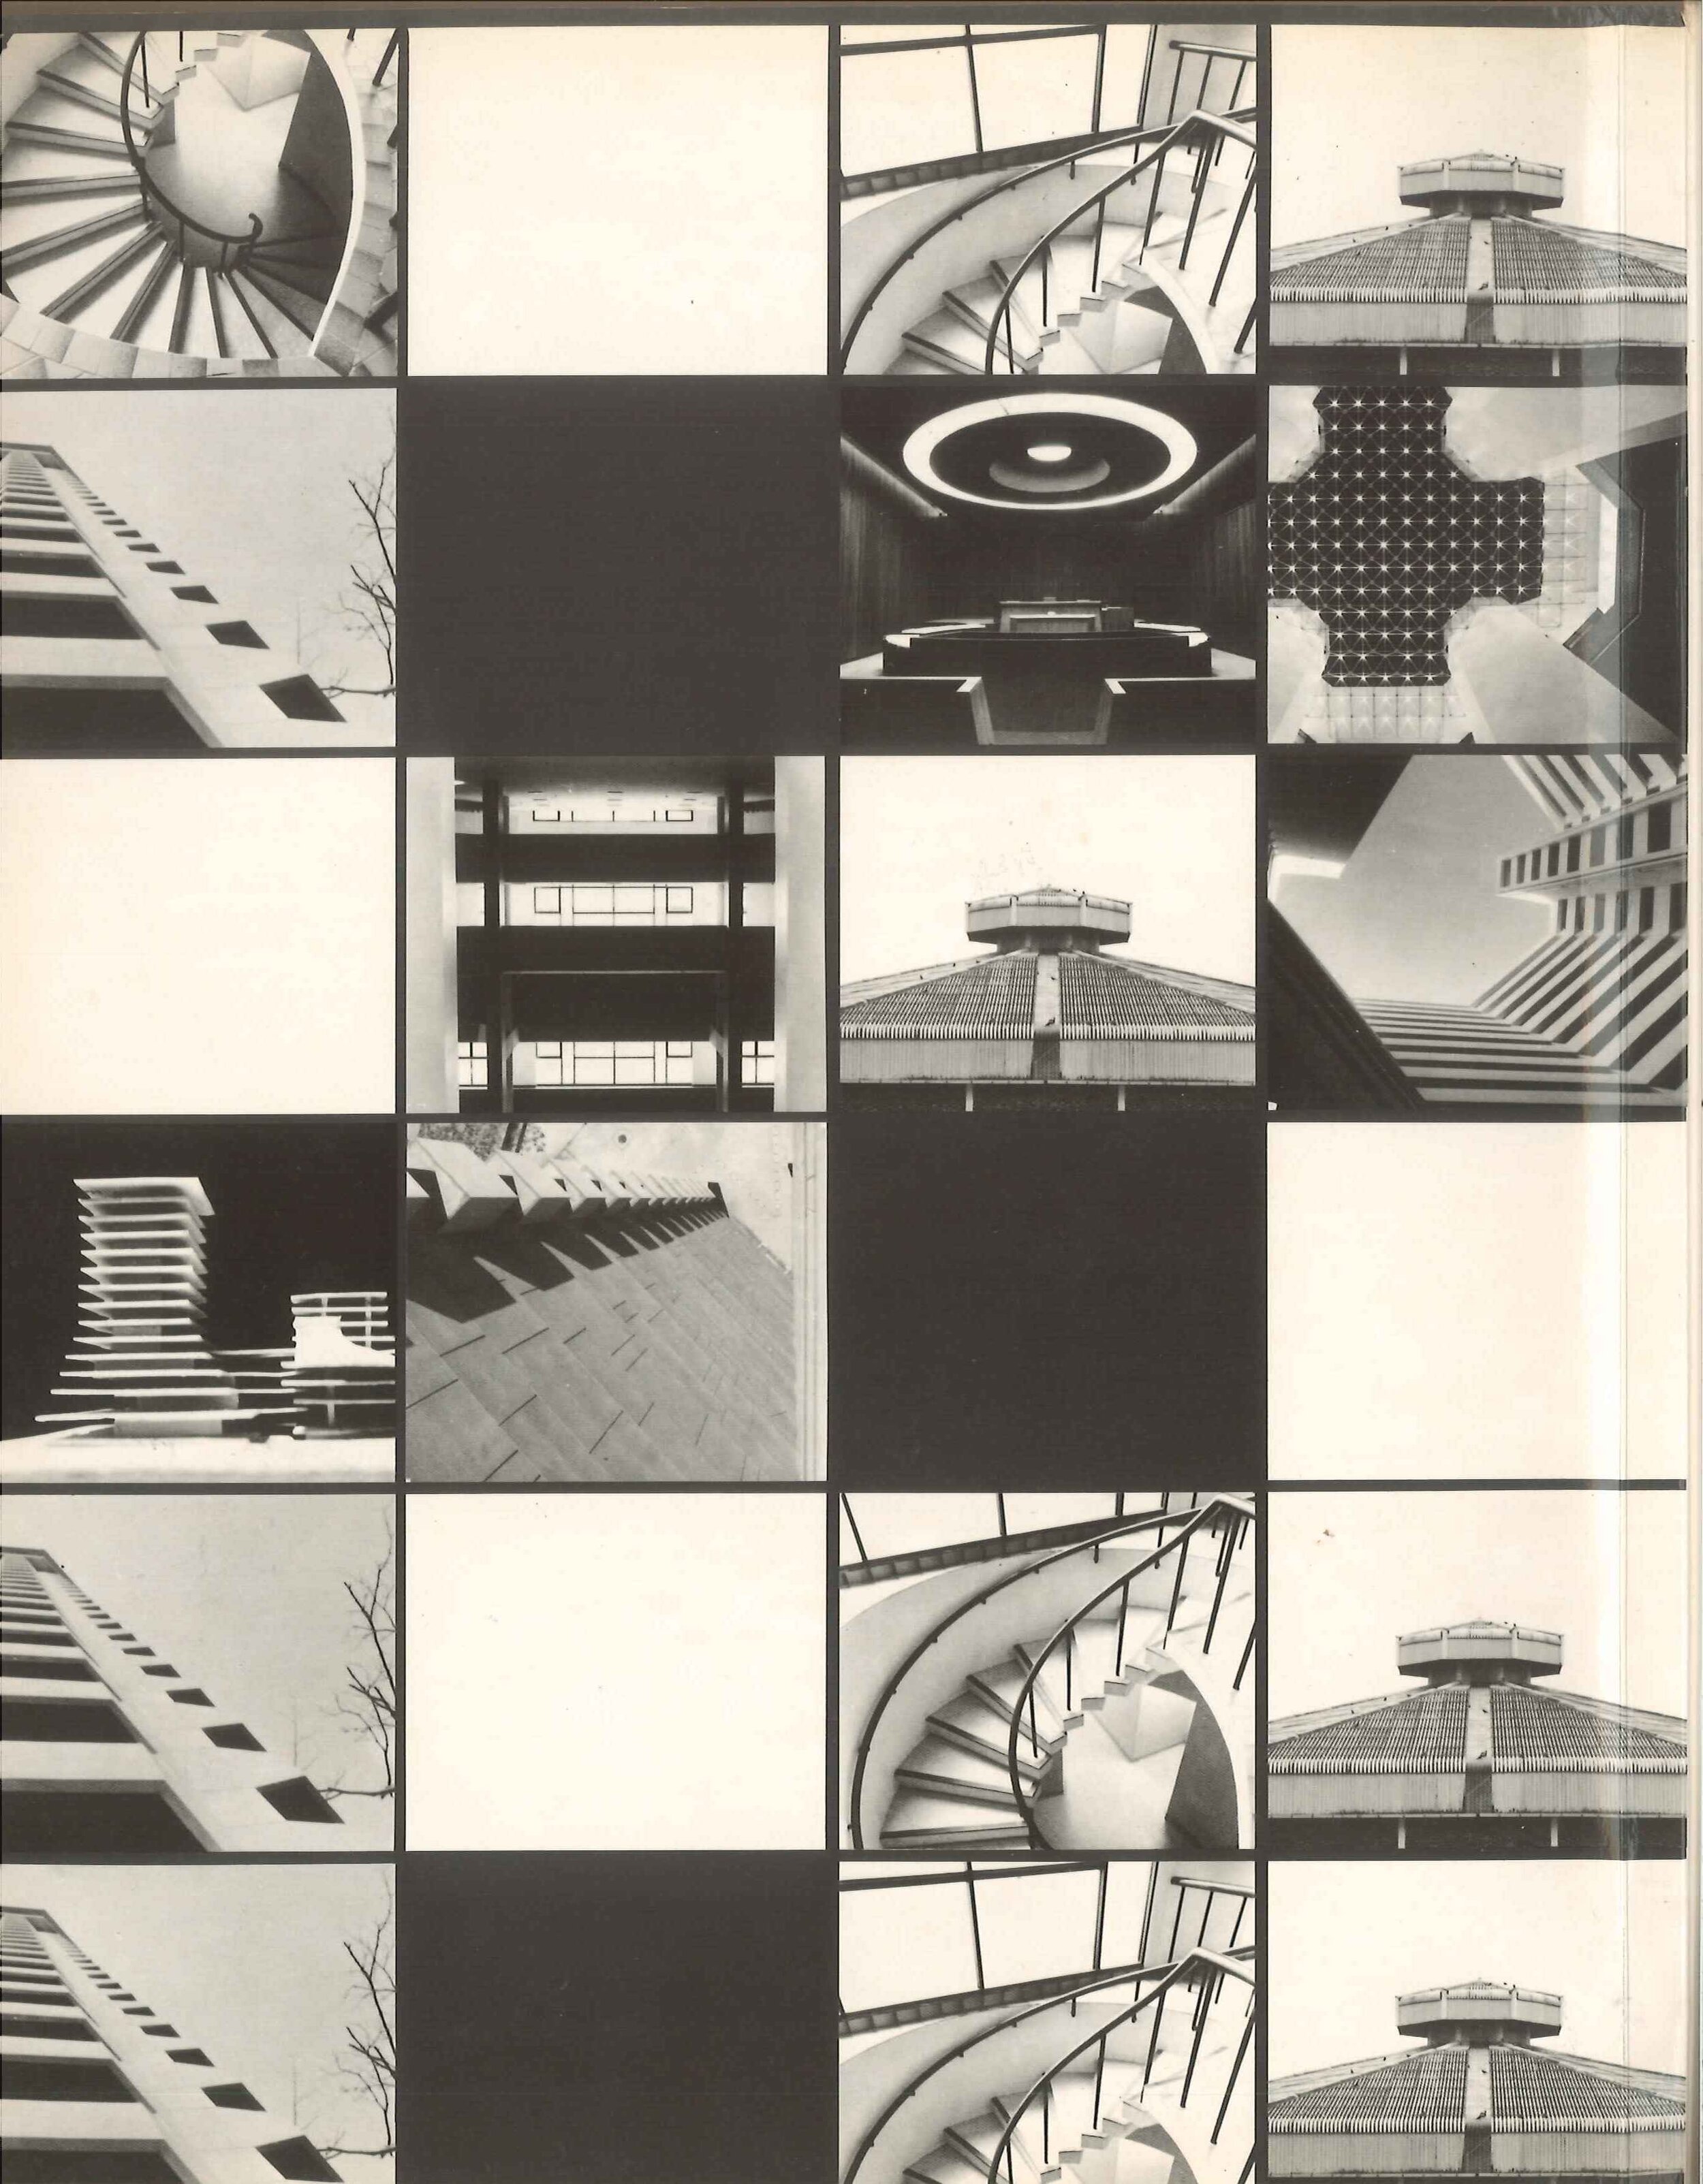 Graphics from a promotional brochure of the firm, c. 1970s. Source: Promotional brochure of the firm in the author's collection.